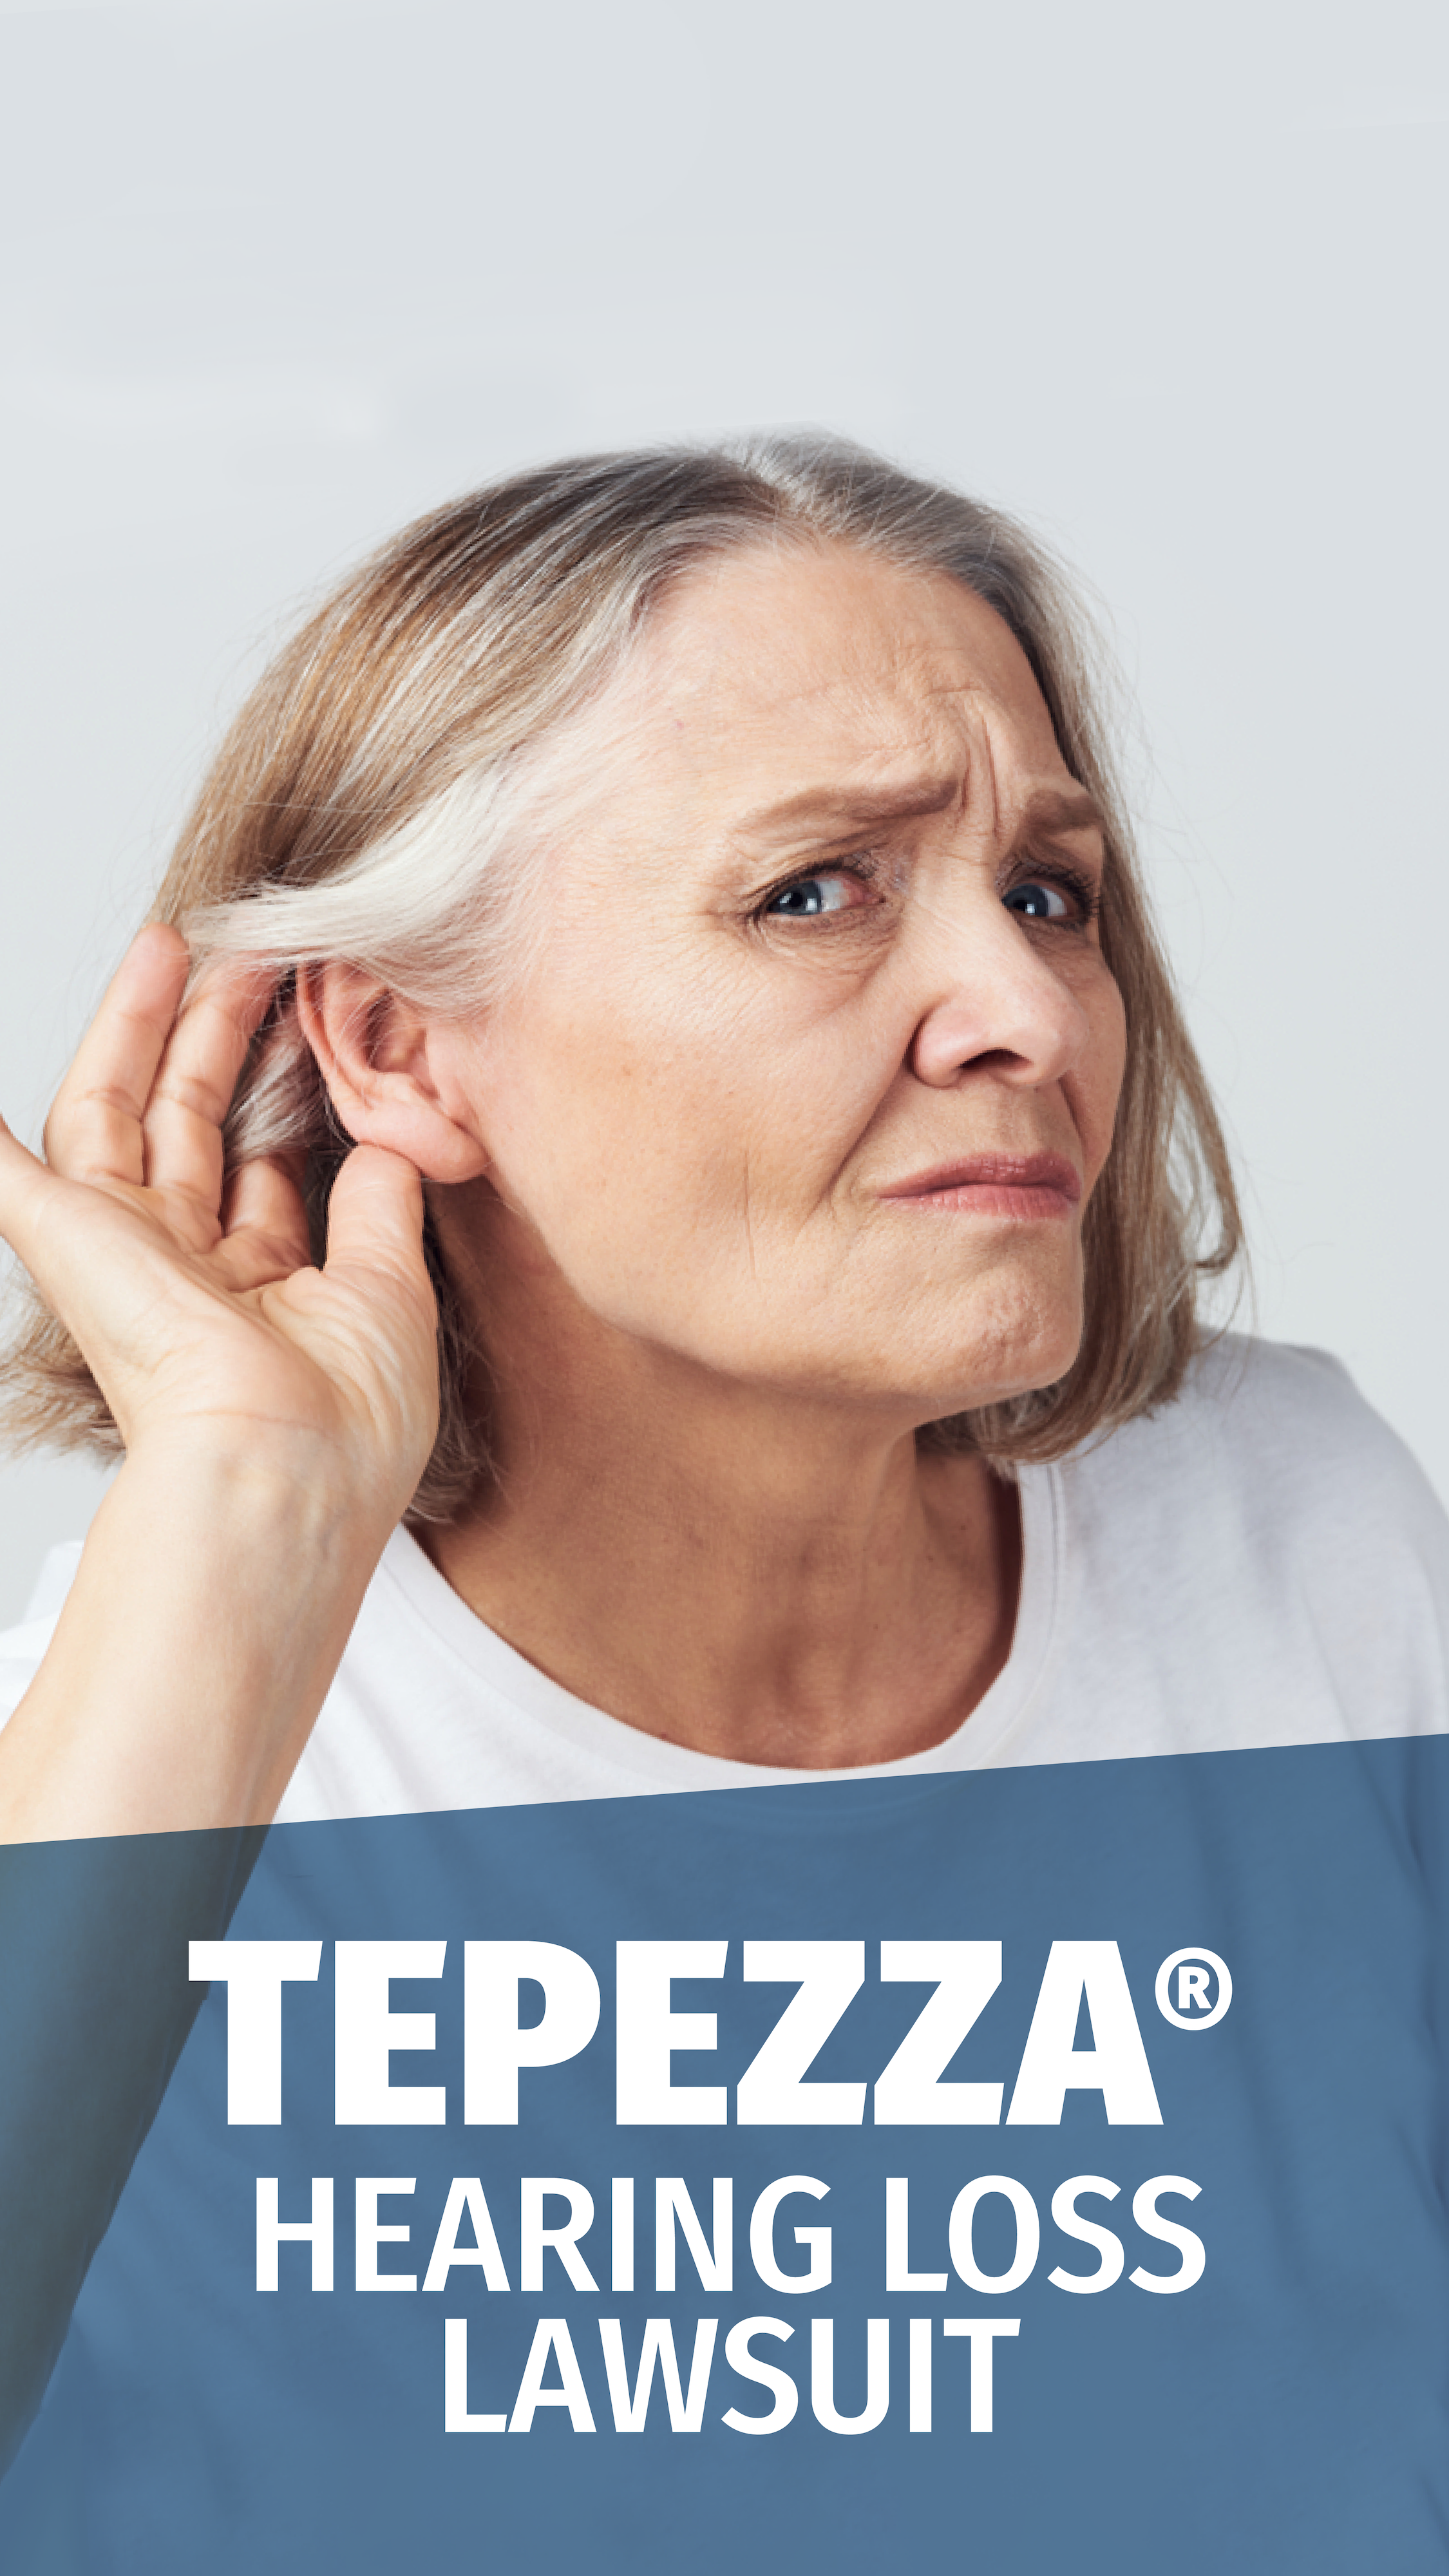 If you have been taking the Thyroid Eye Disease (TED) medication Tepezza and are now experiencing hearing loss, contact us for a free case review.